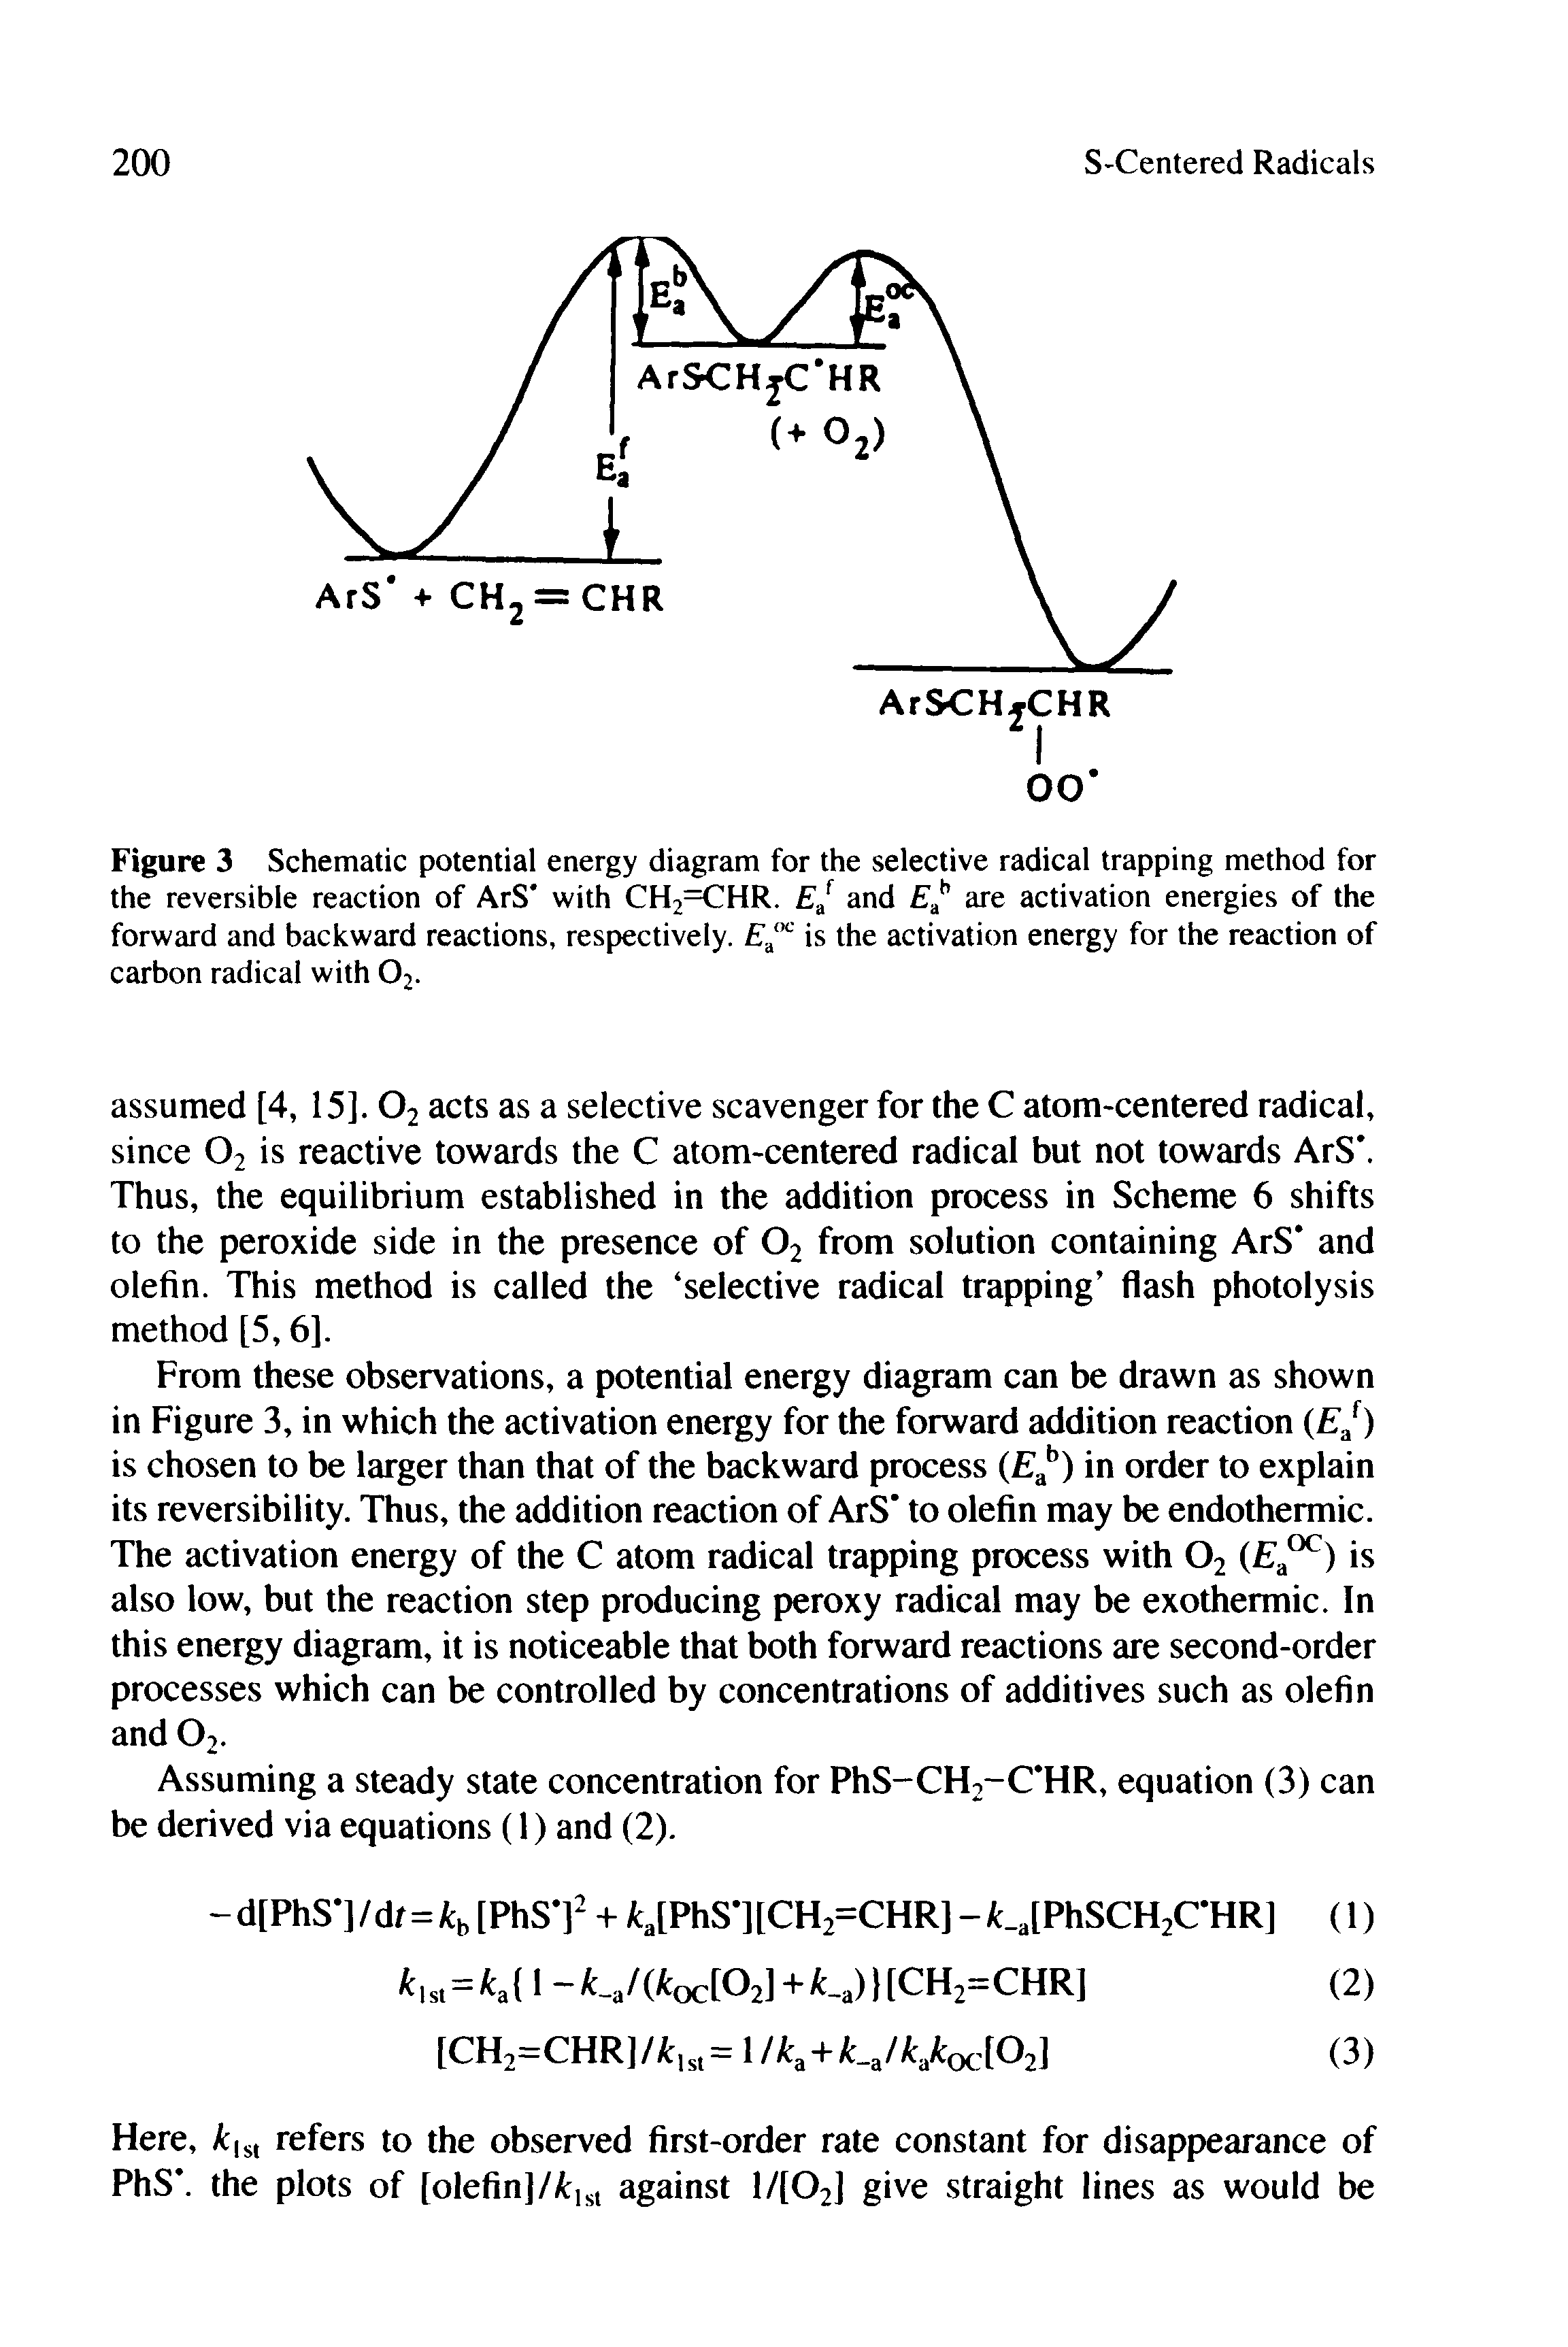 Figure 3 Schematic potential energy diagram for the selective radical trapping method for the reversible reaction of ArS with CH2=CHR. and are activation energies of the forward and backward reactions, respectively. E. is the activation energy for the reaction of carbon radical with O2.